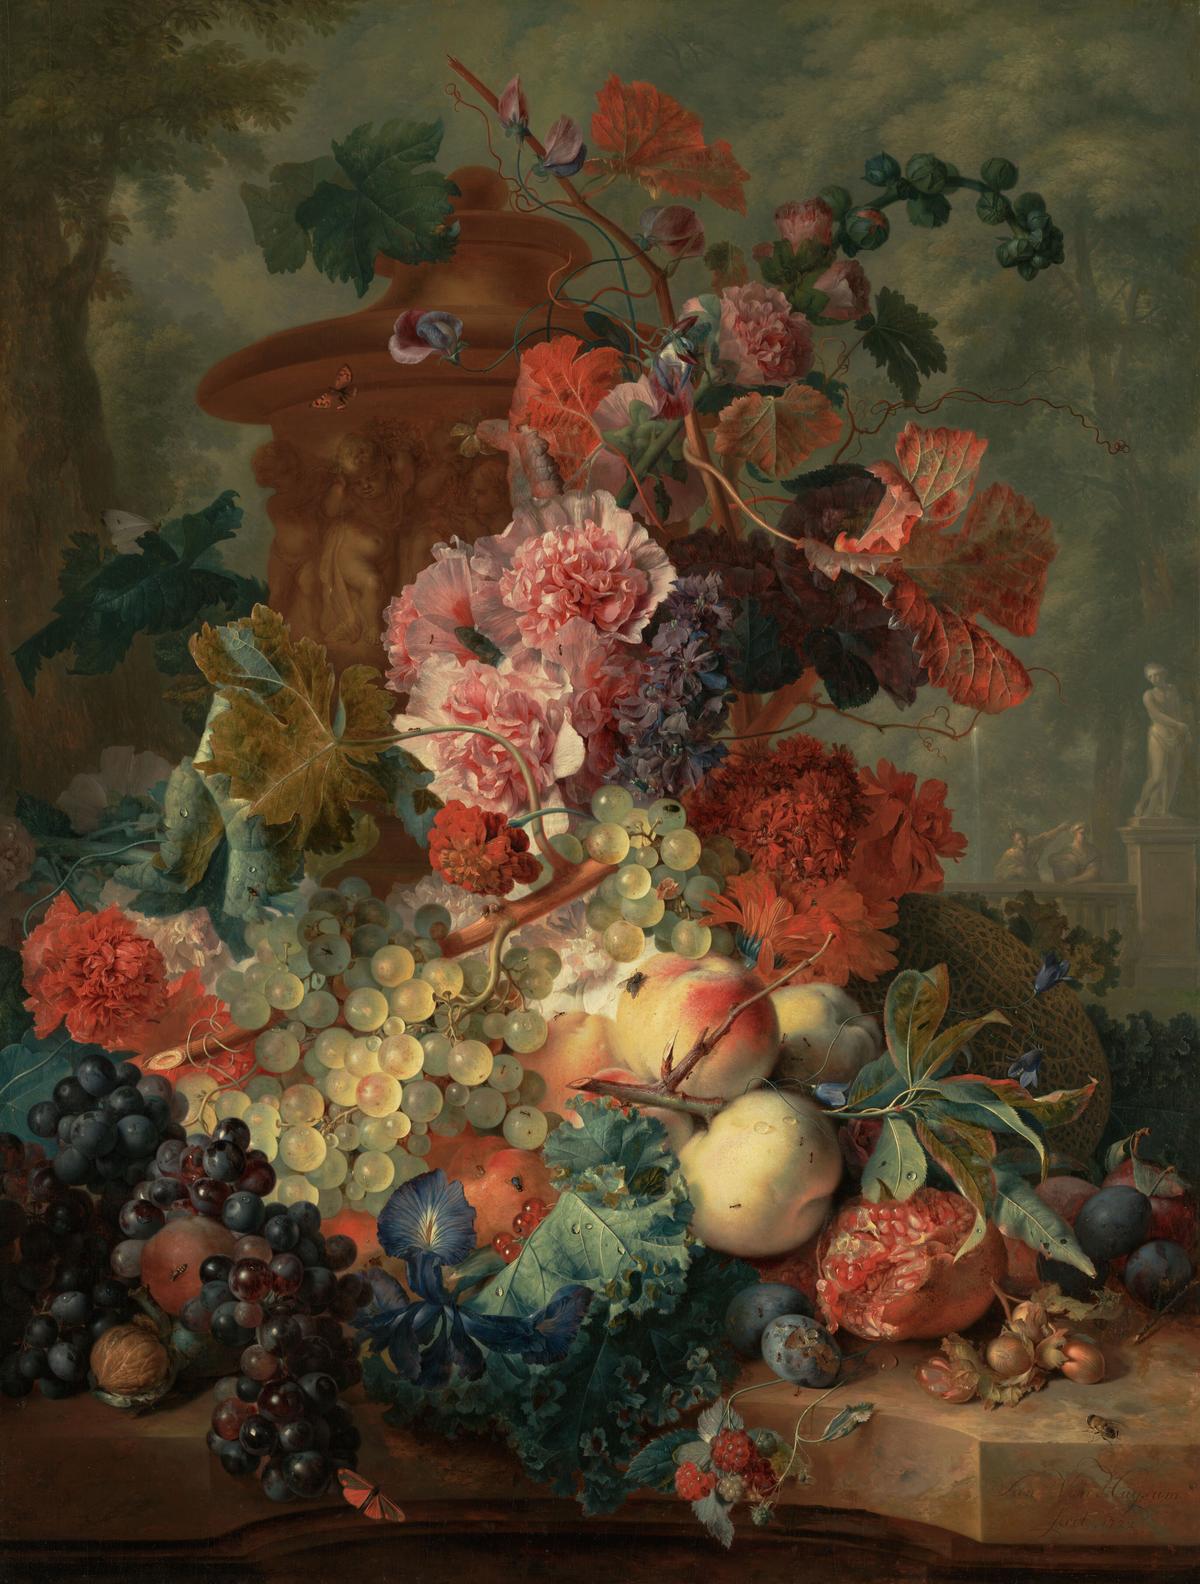 "Fruit Piece," 1722, by Jan van Huysum. Oil on panel; 31 1/2 inches by 24 inches. Getty Center, Los Angeles. (Public Domain)